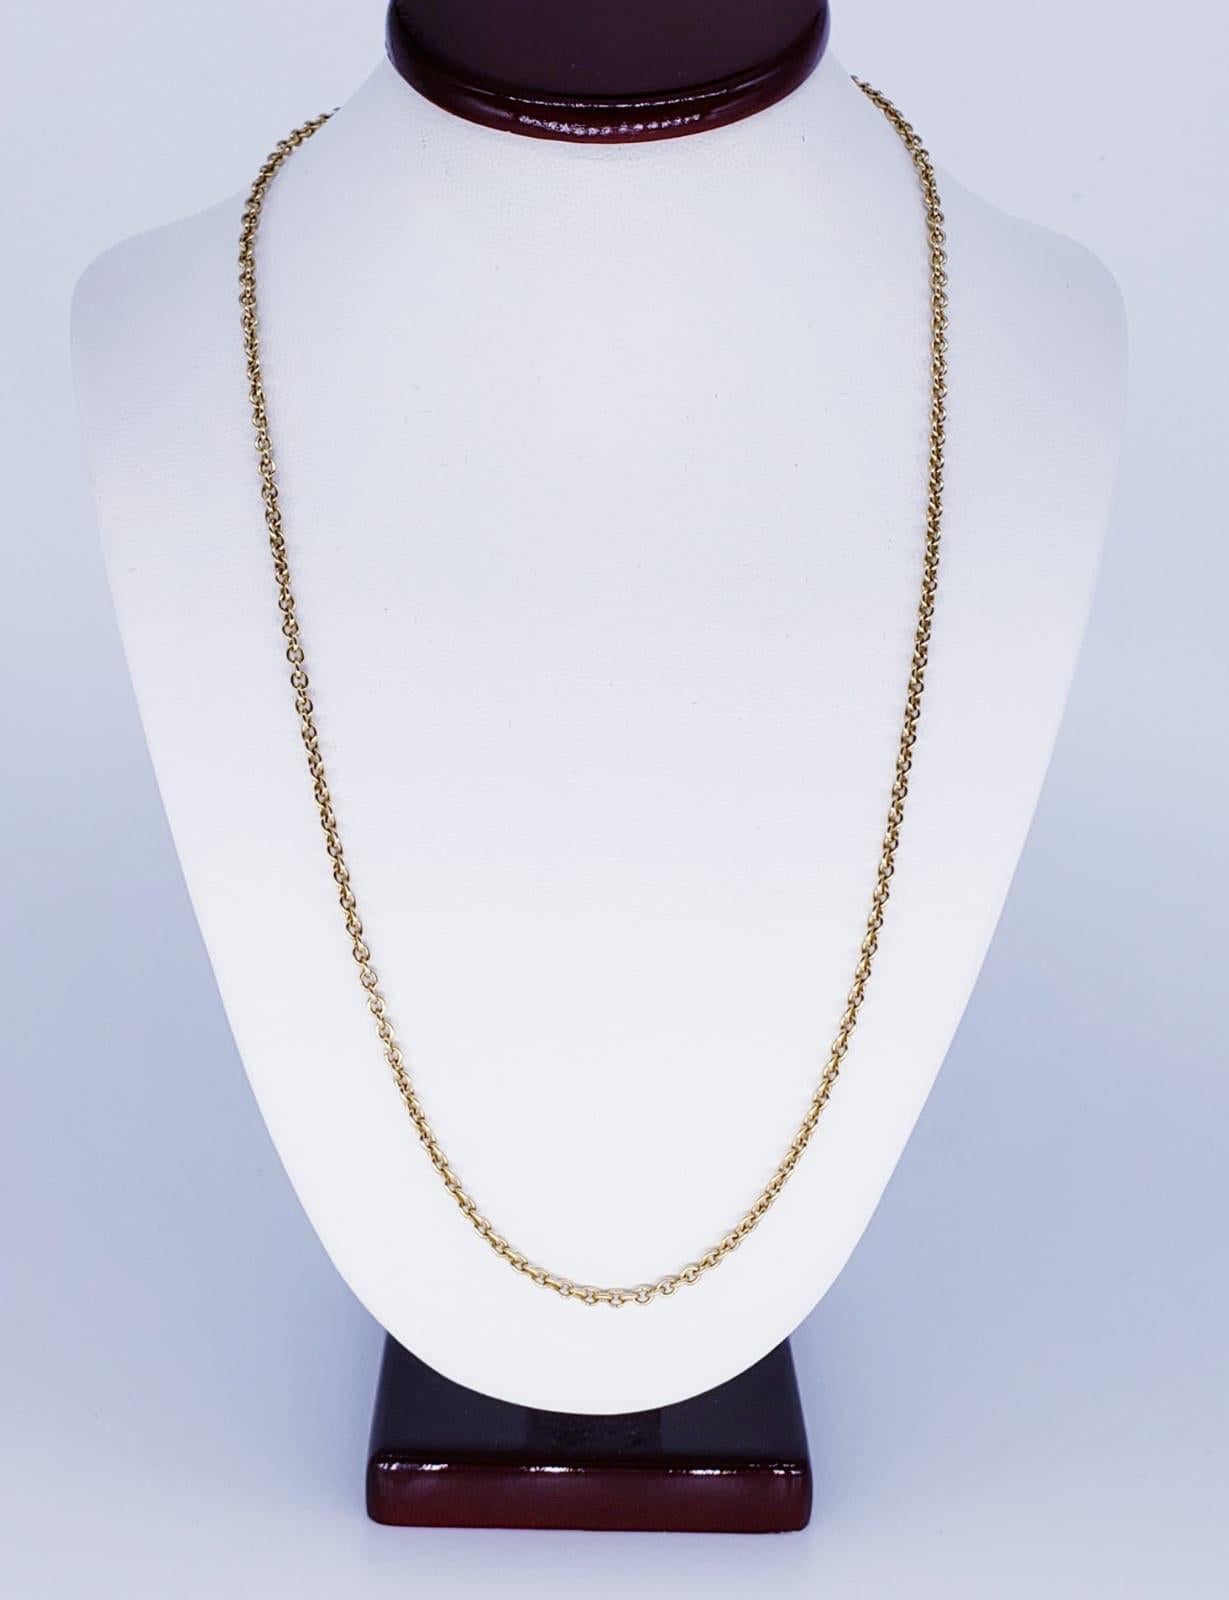 Vintage Classic 2mm Cartier 18k Gold Necklace 16 Inches. The necklace is gorgeous Cartier link that will stand out. Very nice design by the famous Cartier brand. True classic. The necklace weights 6.8 grams.